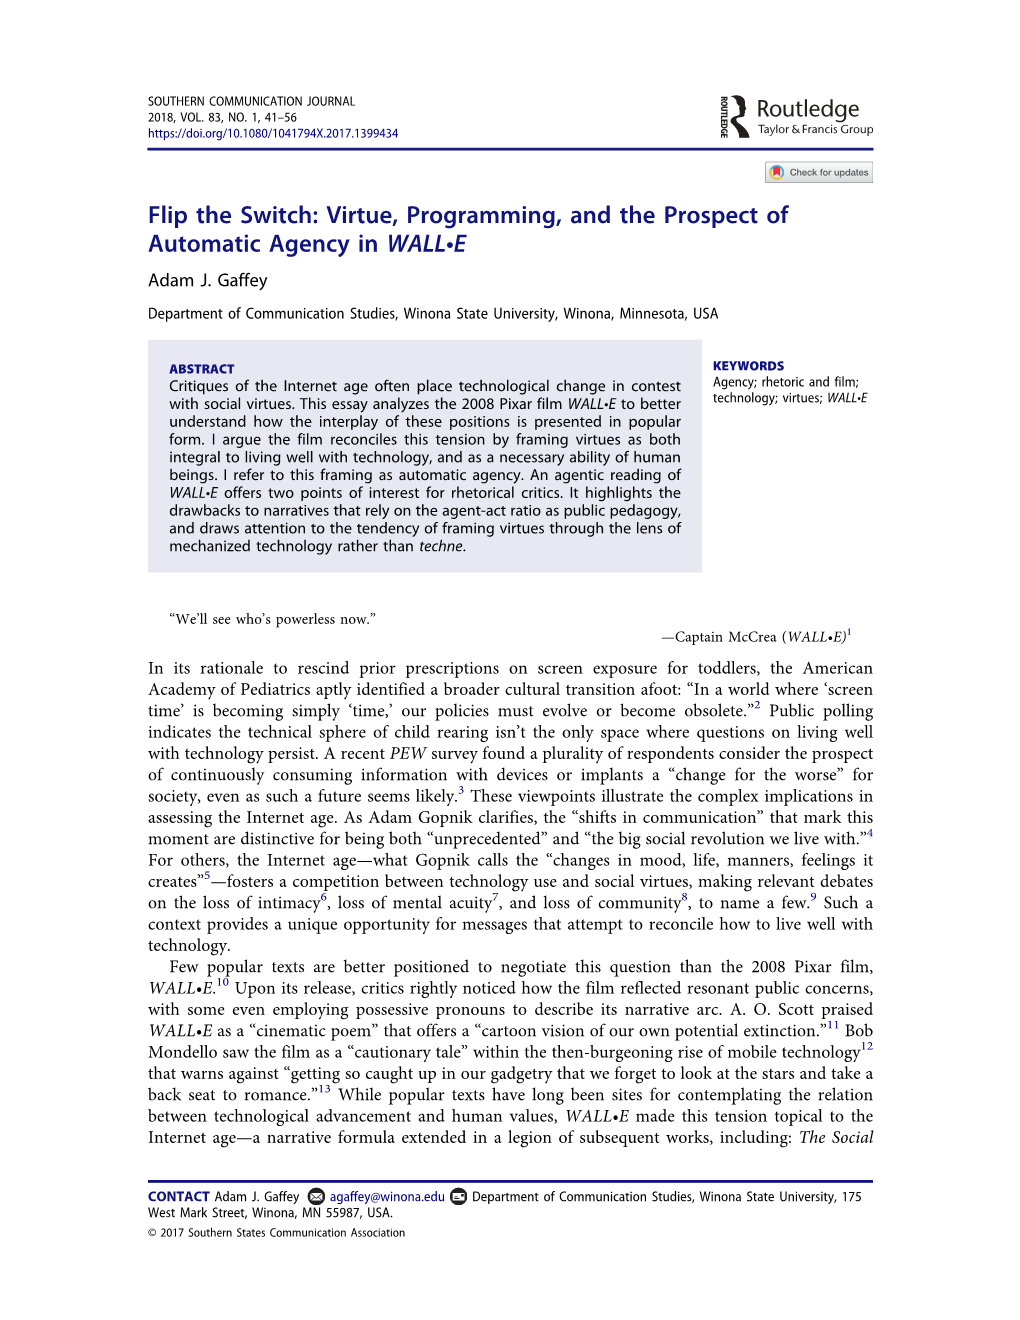 Flip the Switch: Virtue, Programming, and the Prospect of Automatic Agency in WALL•E Adam J